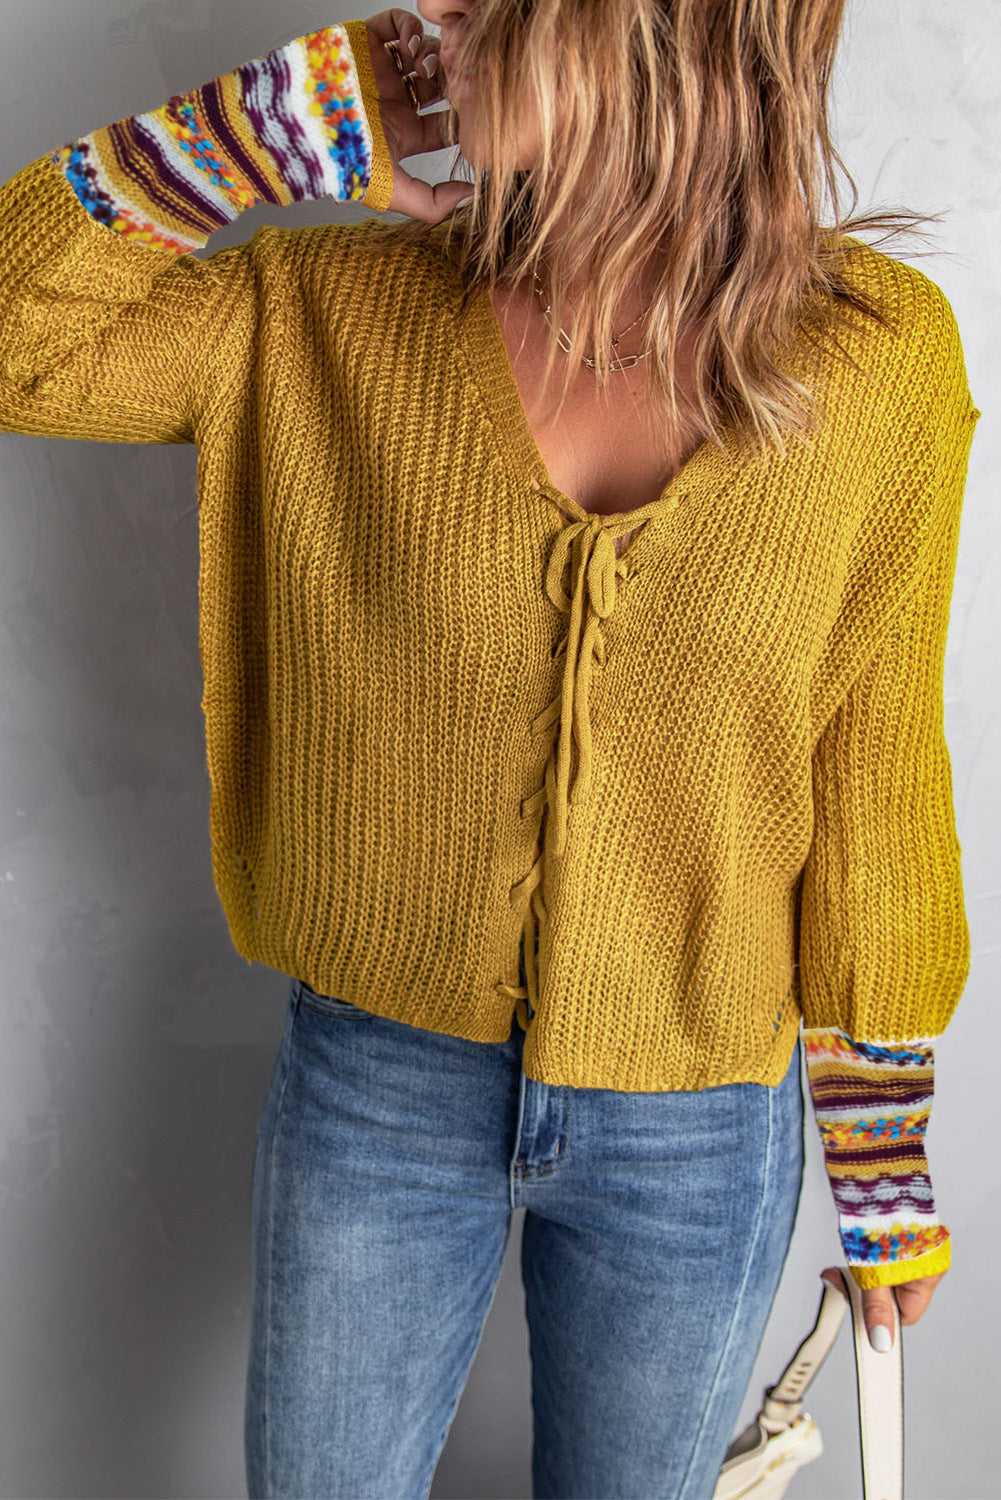 Yellow Lace up V Neck Knit Sweater